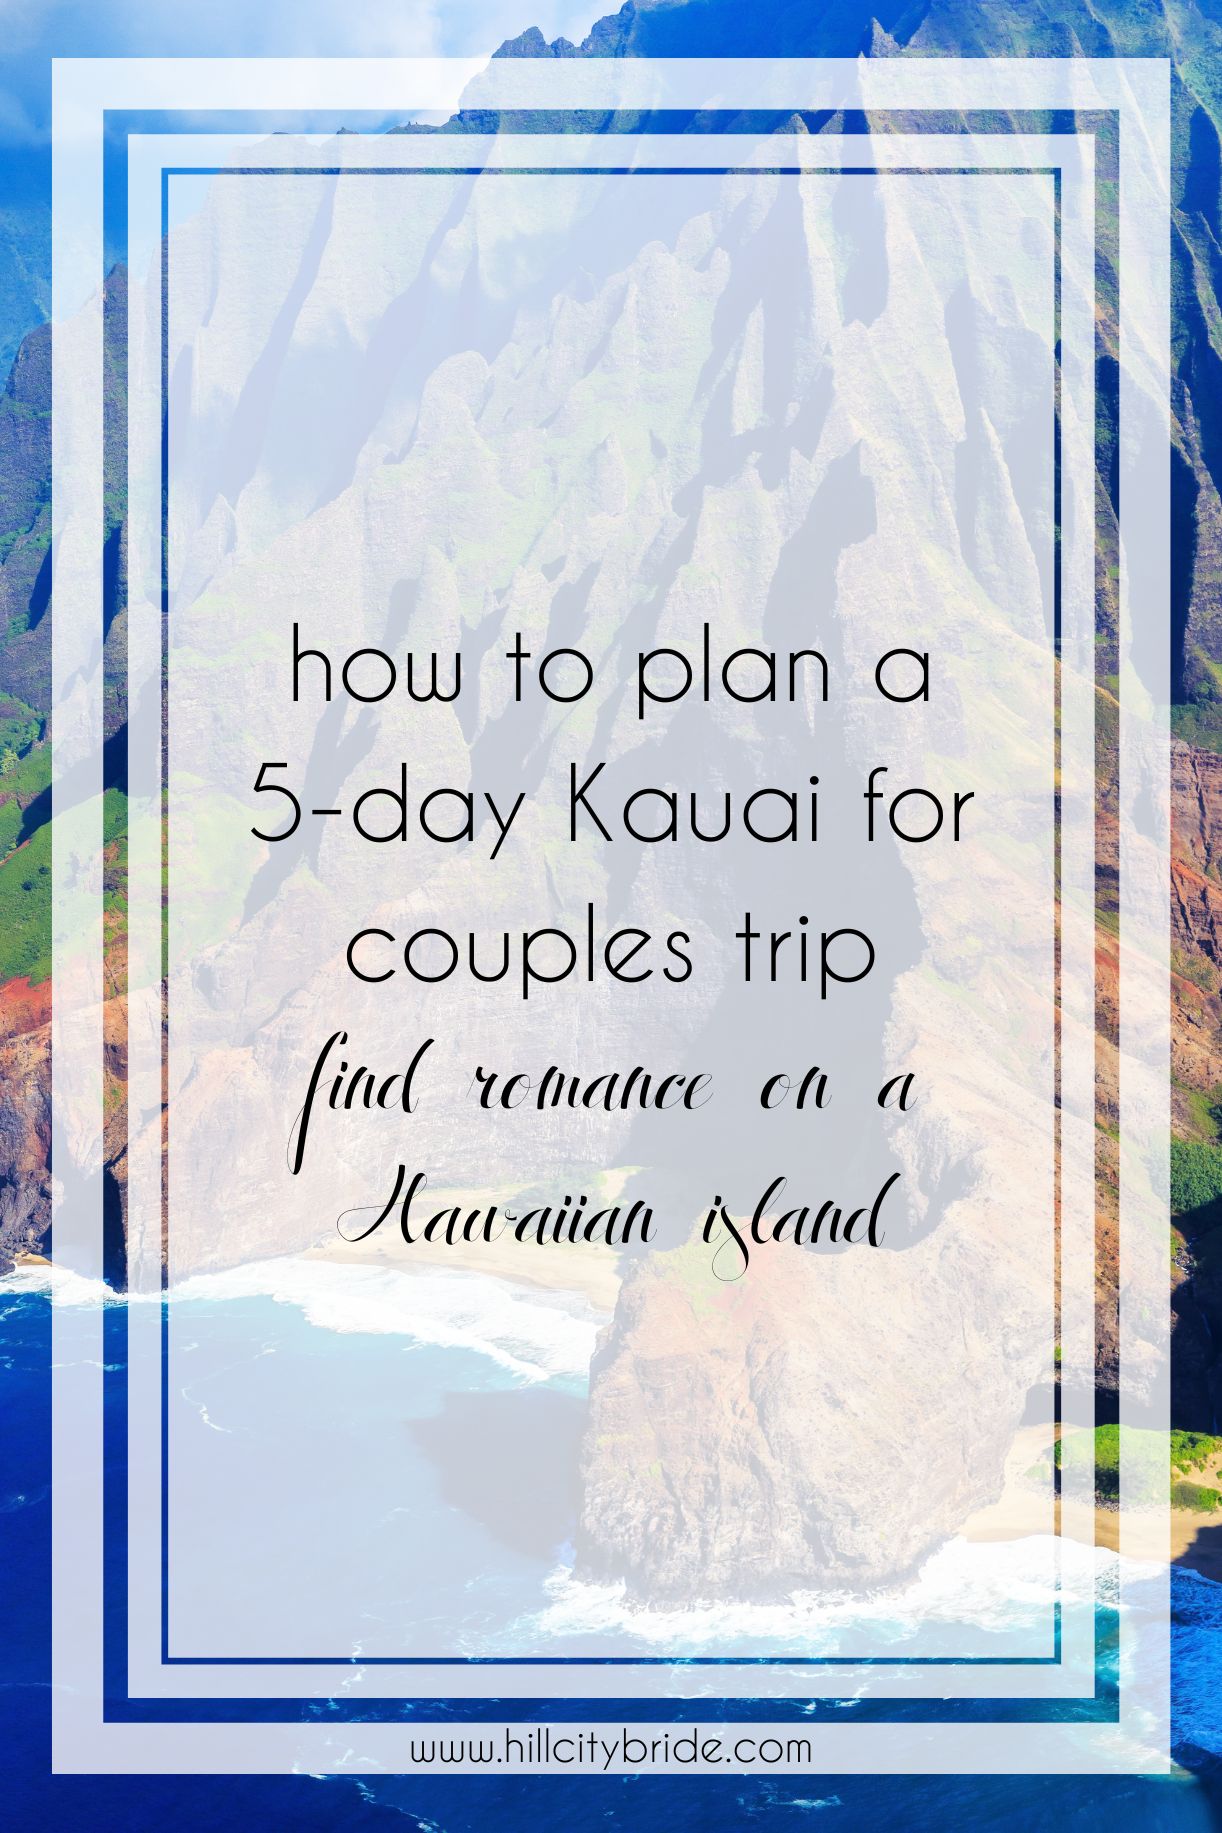 How to Spend 5 Days in Kauai for Couples